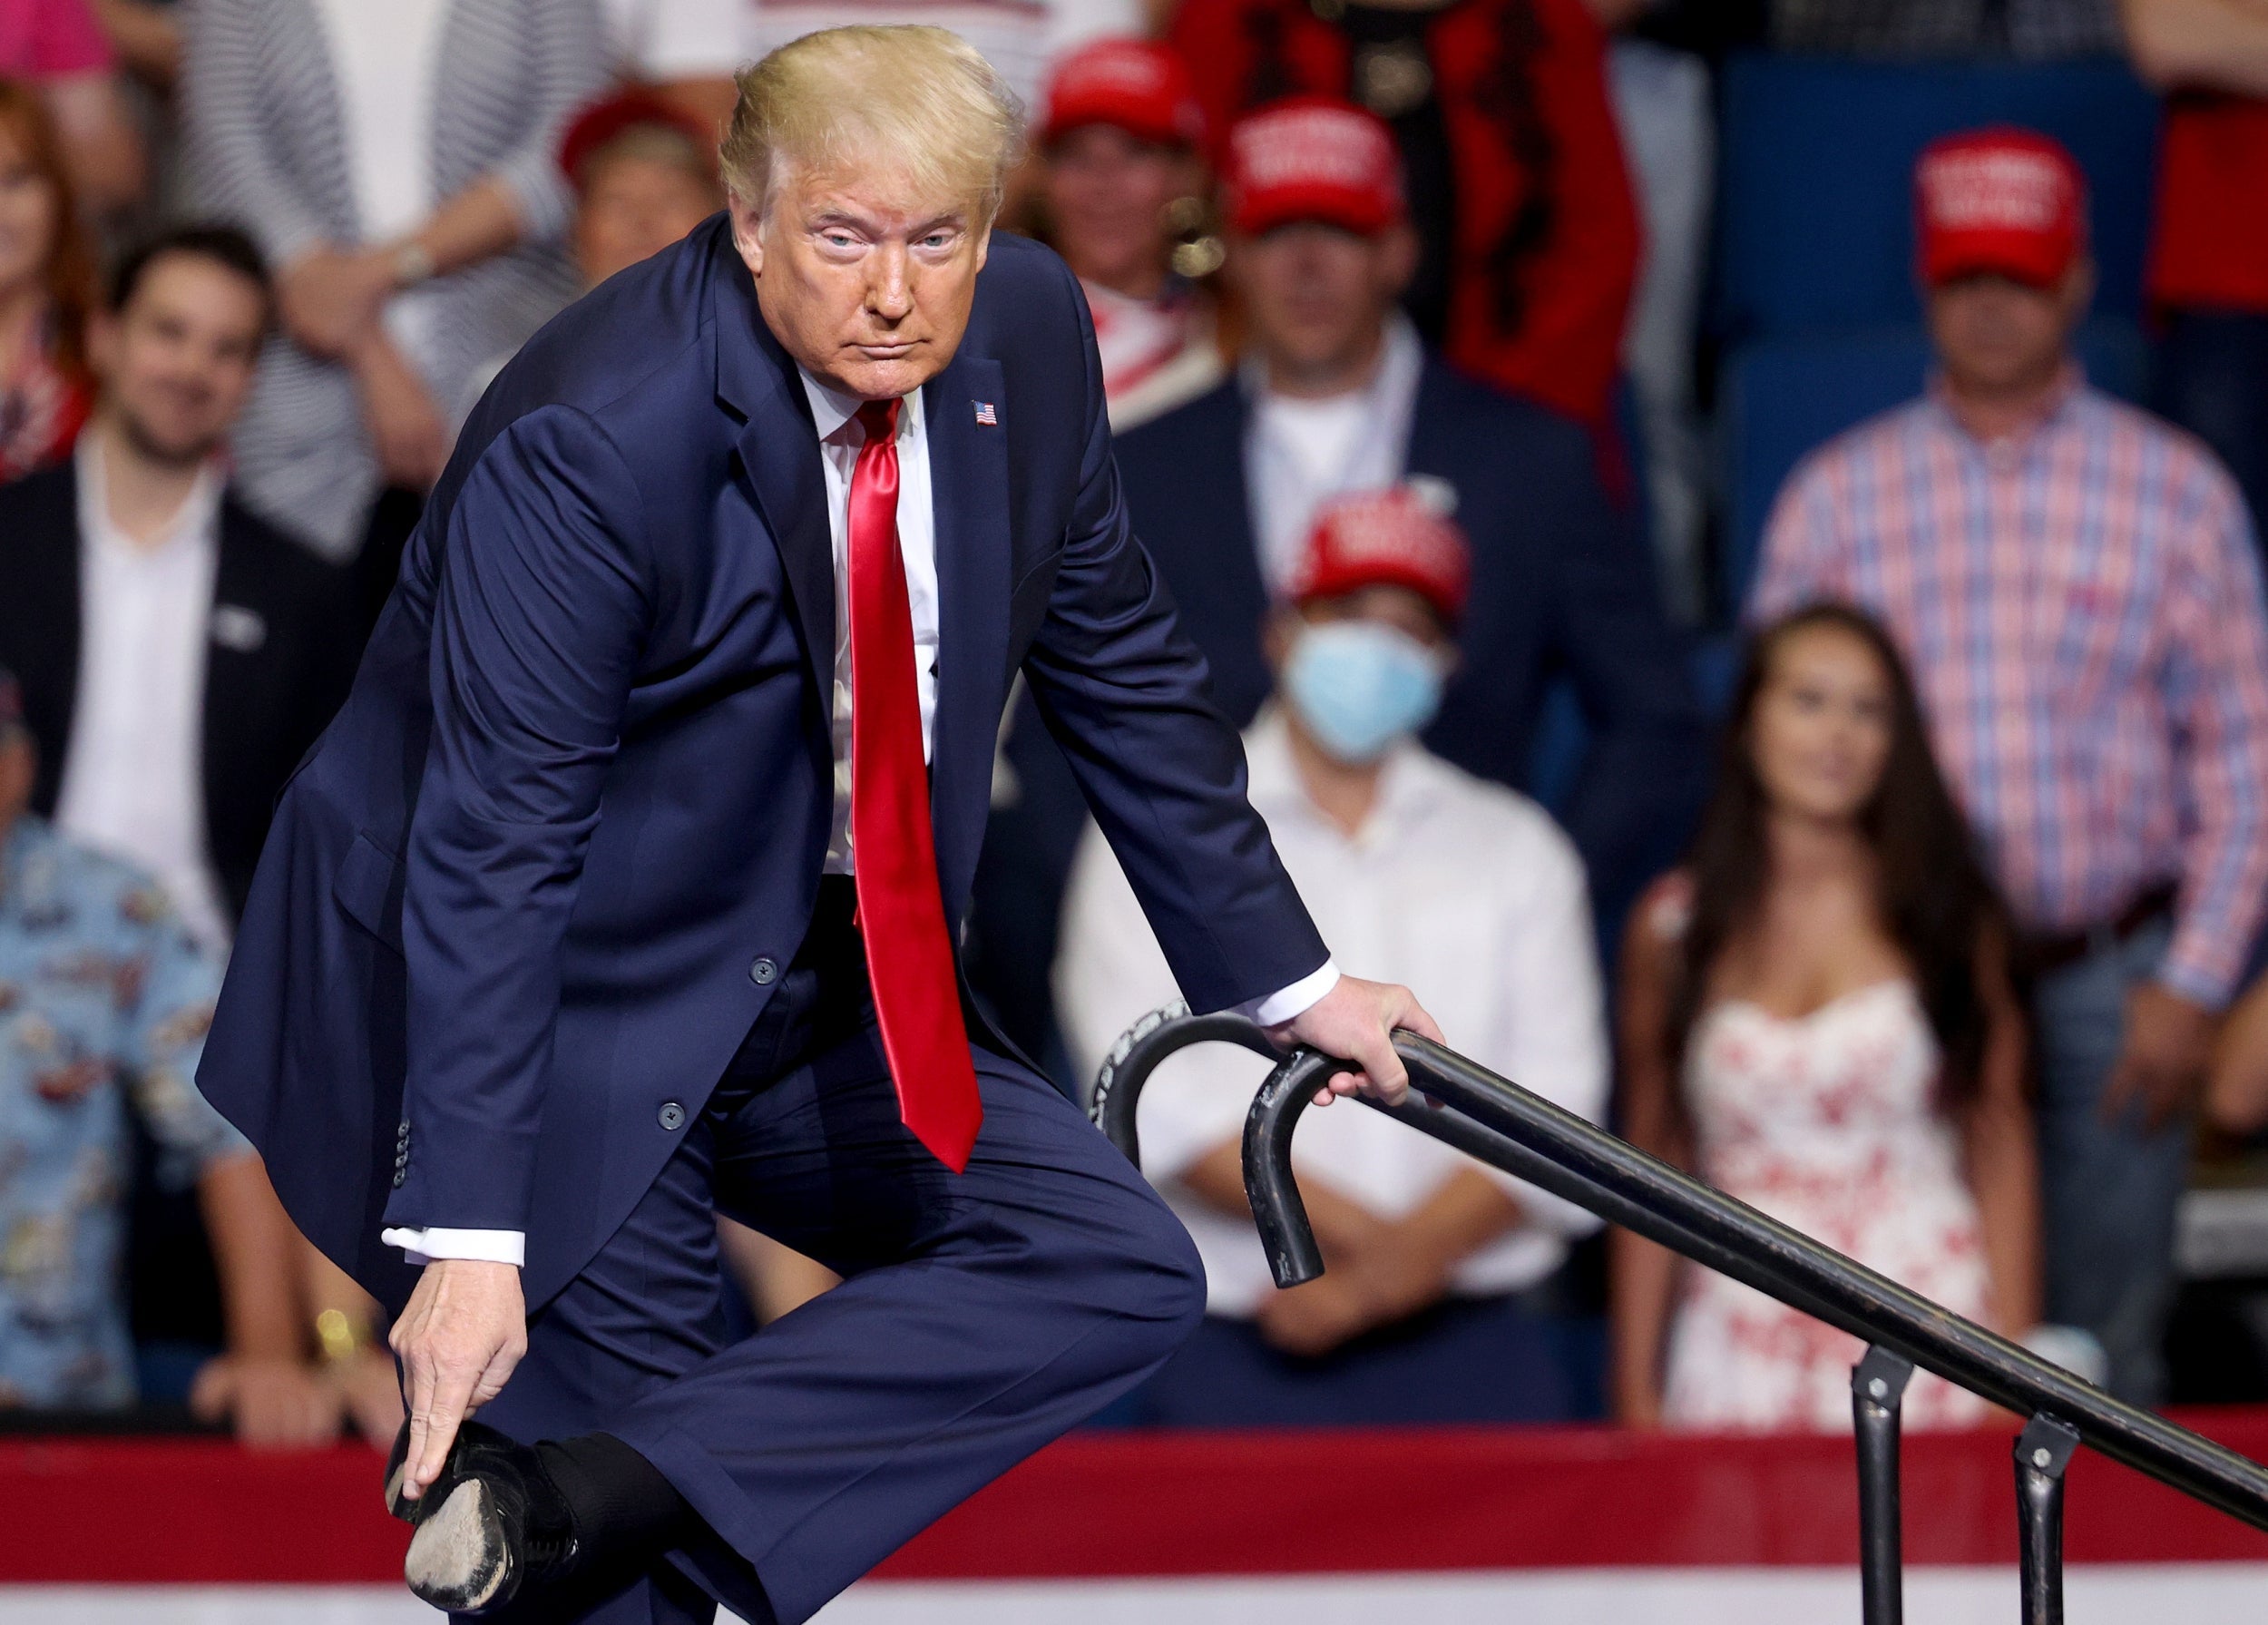 Donald Trump points to his shoe at a rally in Tulsa, Oklahoma during a lengthy explanation of why he walked so carefully on a ramp at West Point military academy a week earlier